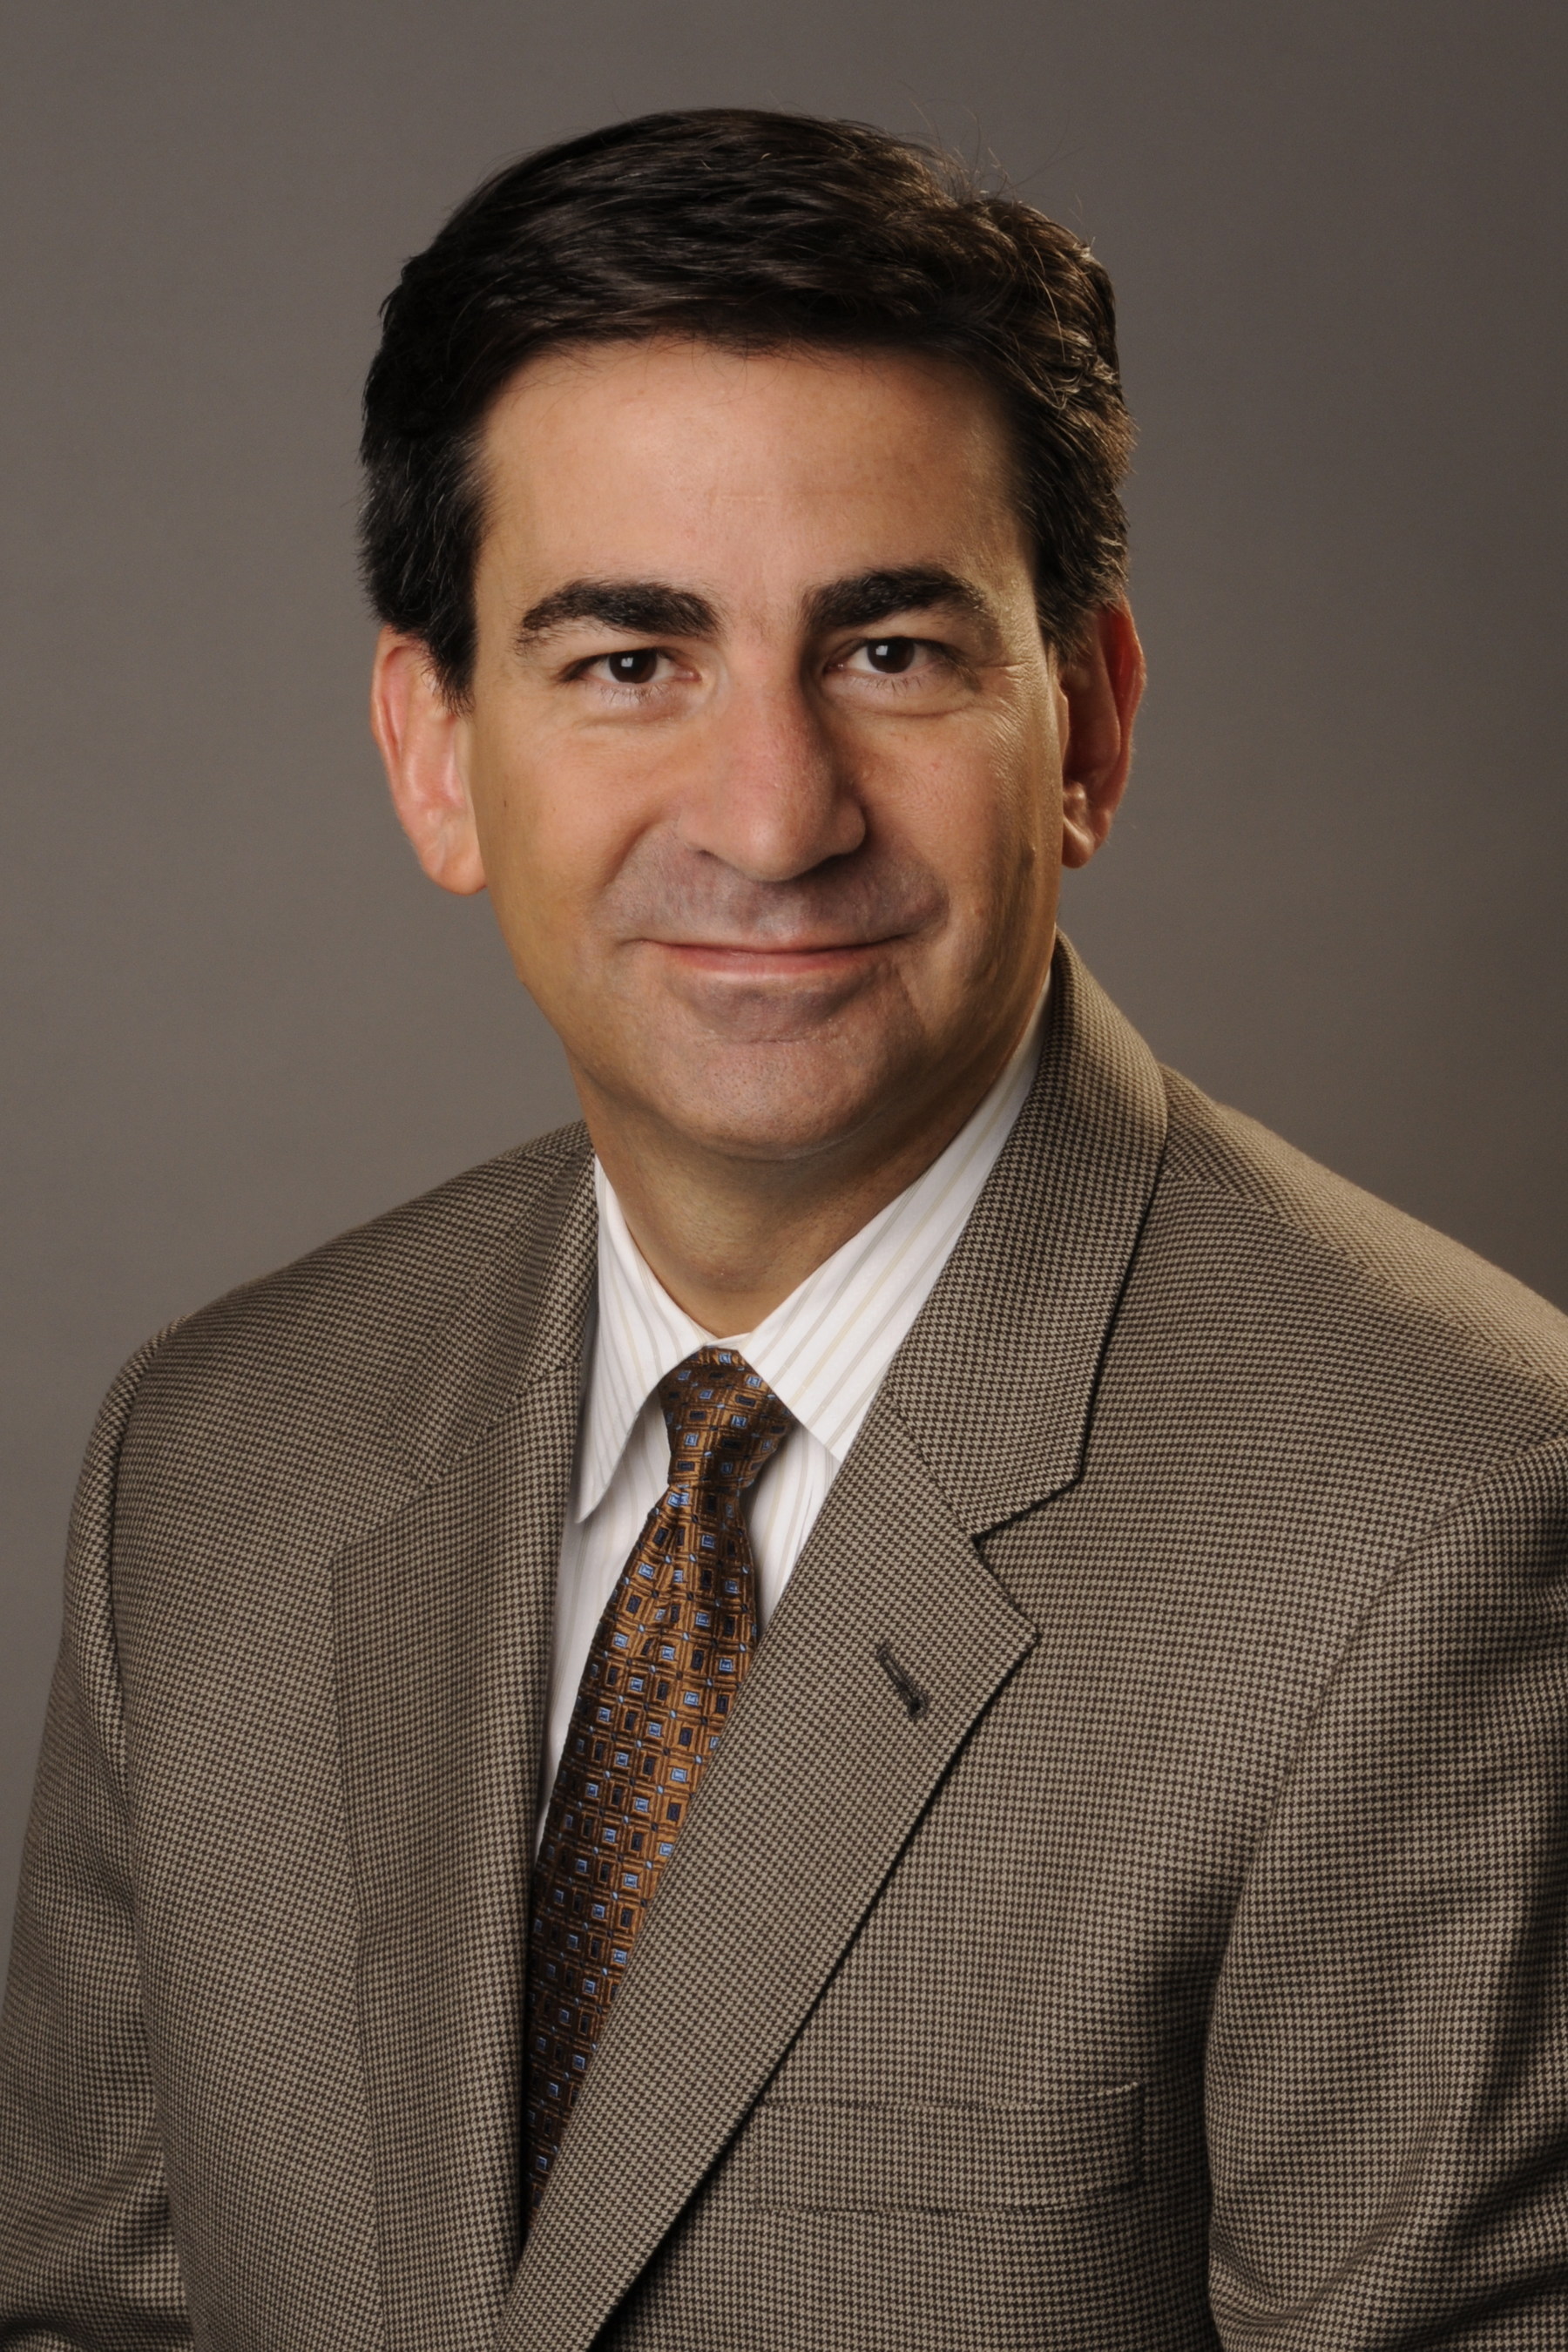 Frank R. Jimenez Appointed General Counsel for Raytheon Company